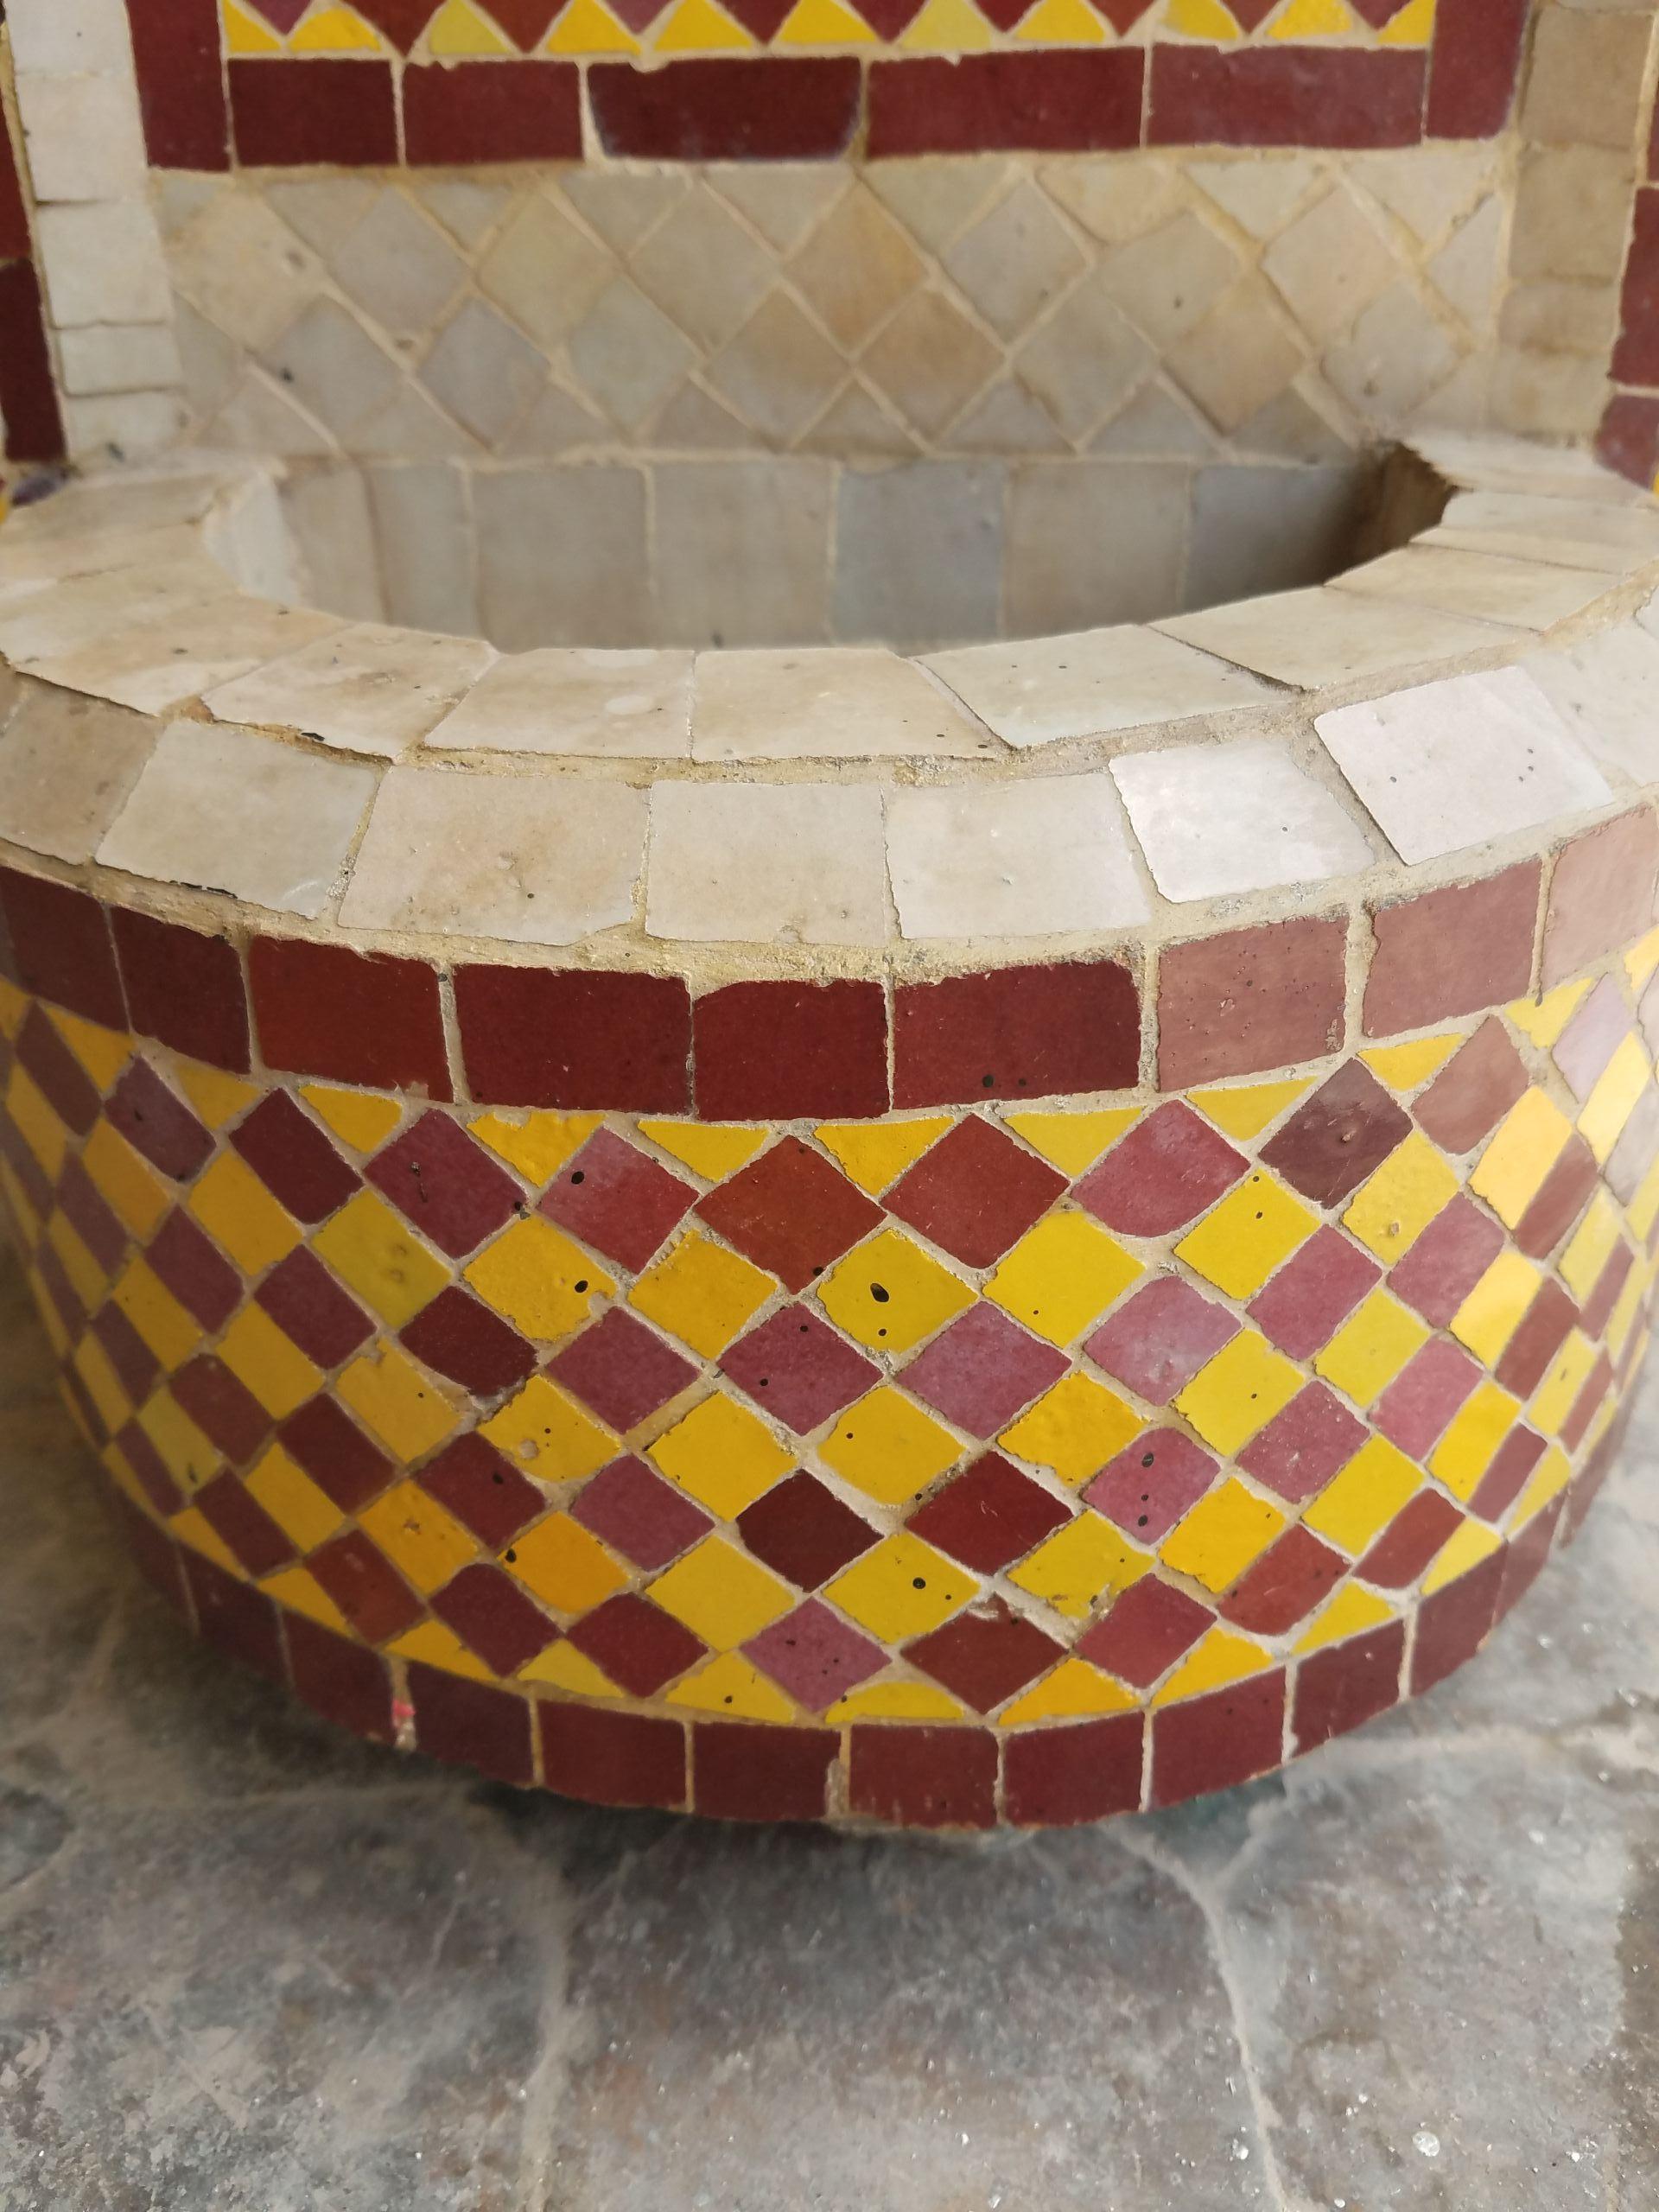 Mini Moroccan mosaic fountain handmade in Marrakech, Morocco. Colors are burgundy / yellow / beige. This type of fountain is usually found in courtyards and Riads all-over Morocco. Measuring approximately 29